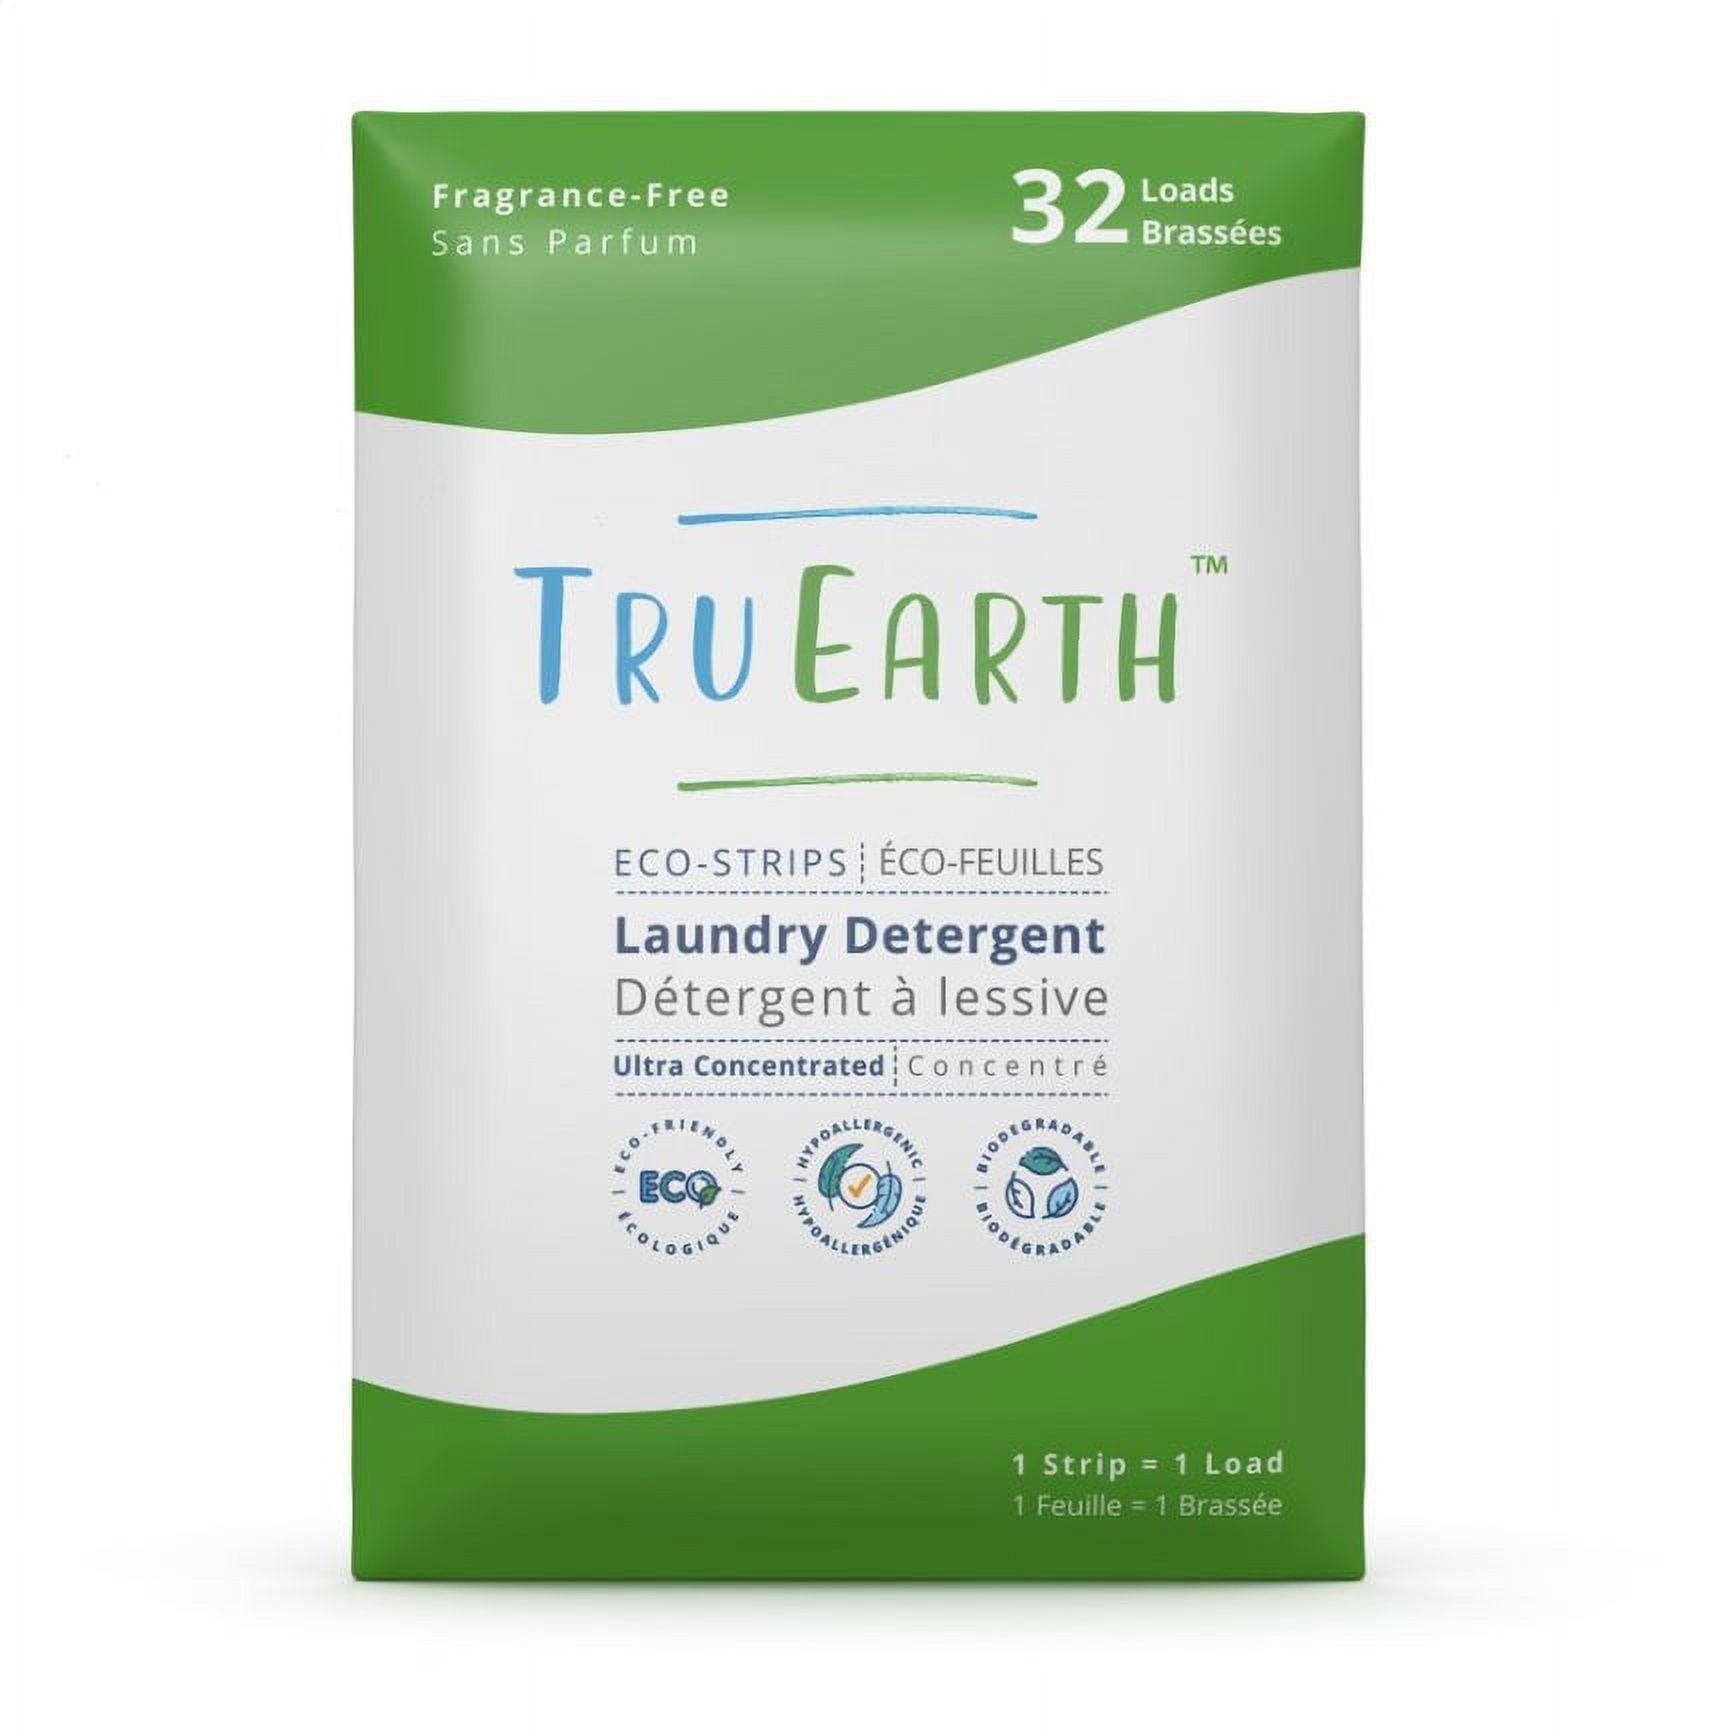 Tru Earth Laundry Detergent Eco Strips